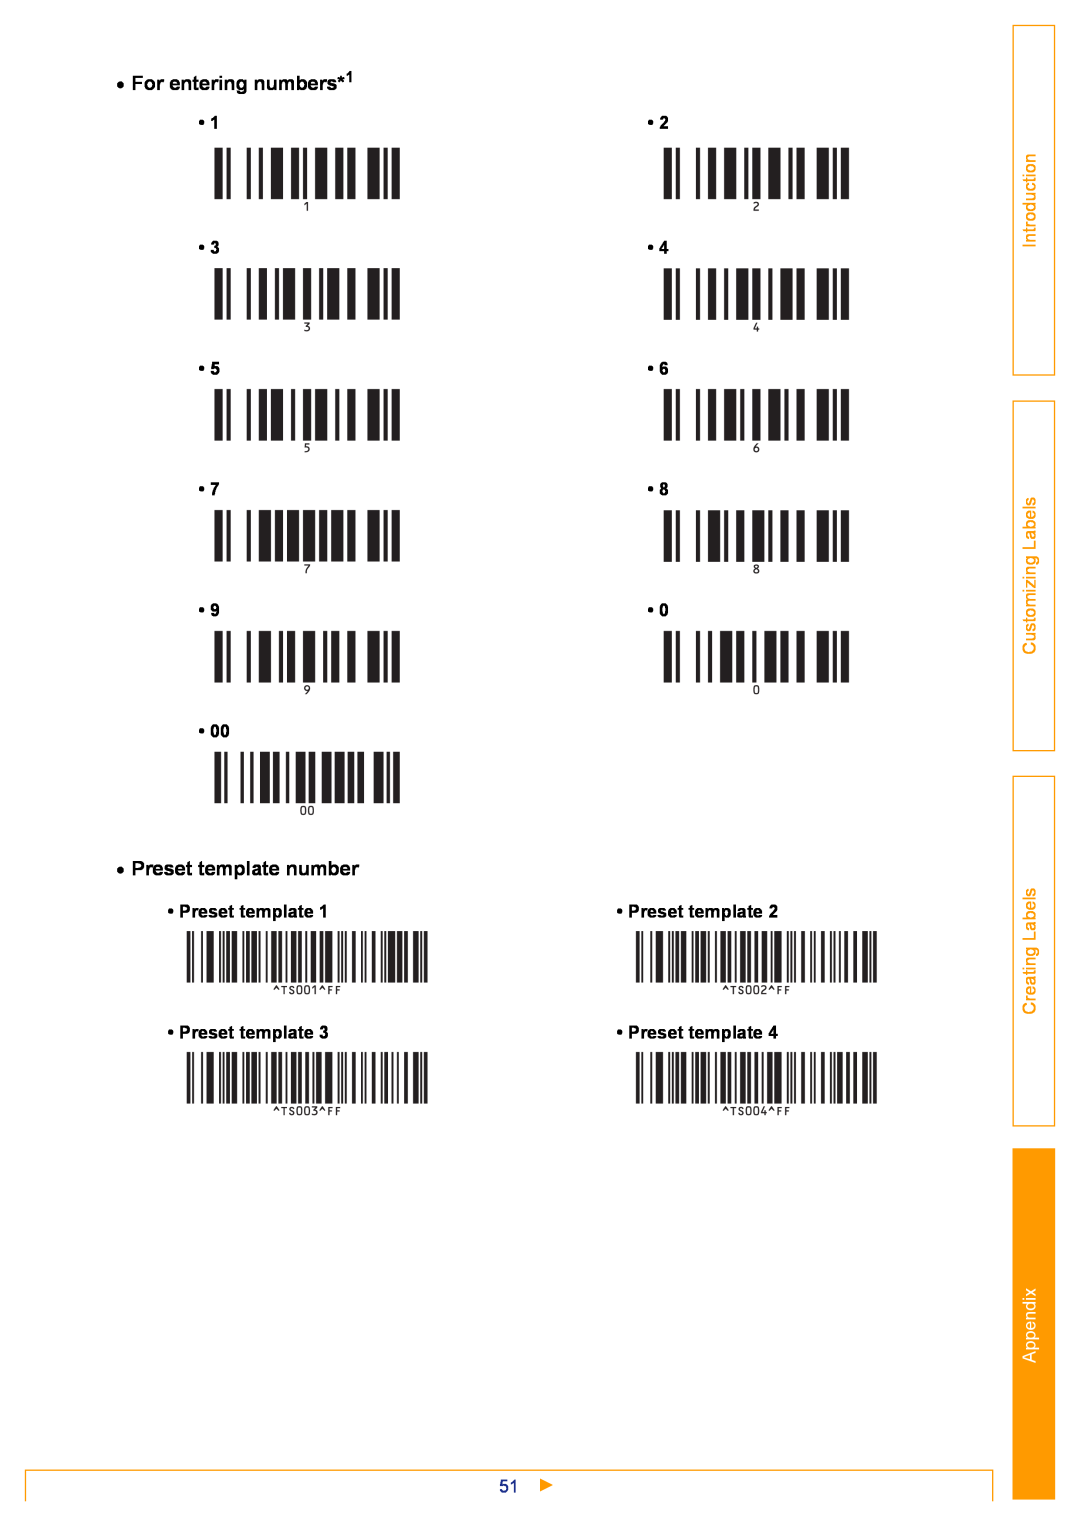 Brother TD-4000 For entering numbers*1, Preset template number, Introduction Customizing Labels Creating Labels, Appendix 